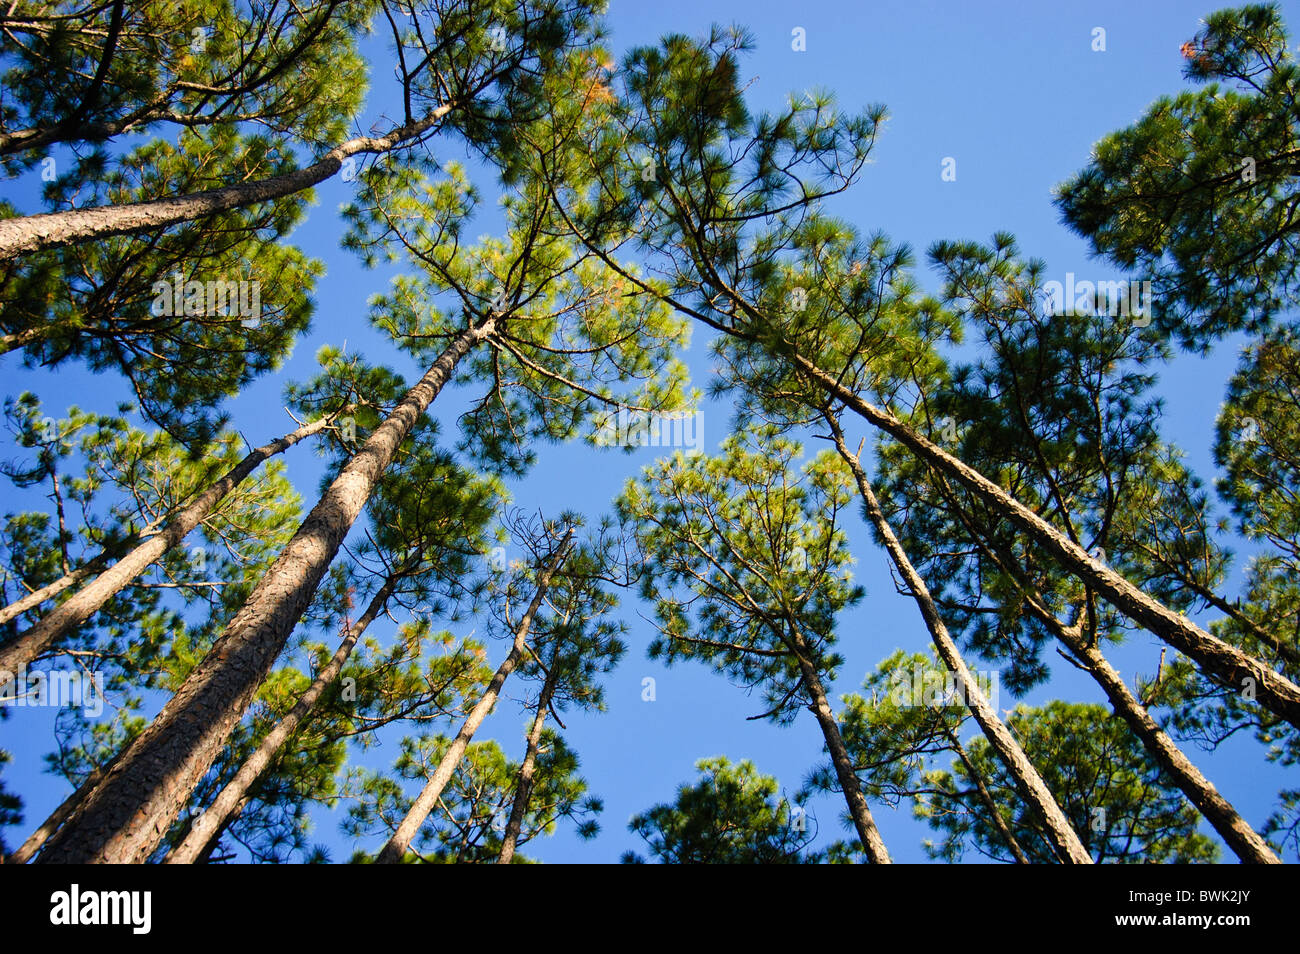 Looking up at the sky through pine trees. Stock Photo